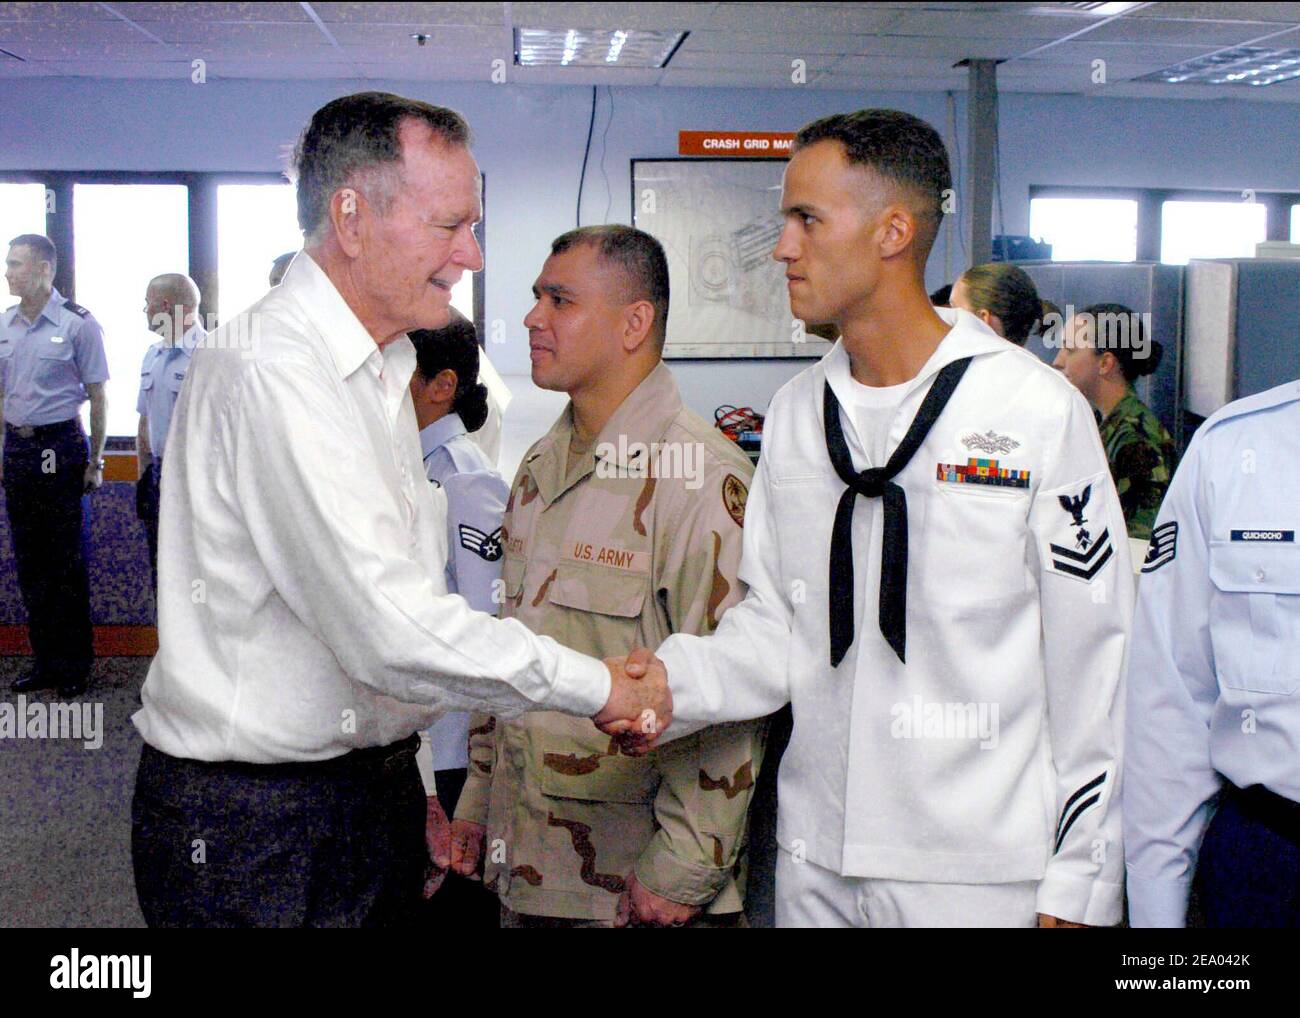 Former President George H. W. Bush shakes the hand of Builder 2nd Class Donald Wintersteen, assigned to Naval Mobile Construction Battalion Seven (NMCB-7), who helped in reconstruction efforts in Sri Lanka after the tsunami ravaged the region. Presidents Bush and Clinton are touring Sri Lanka, Thailand and Indonesia to see first hand, the effects the tsunami had on Southeast Asia on February 19, 2005. Photo by Paul Williams/USN via ABACA. Stock Photo